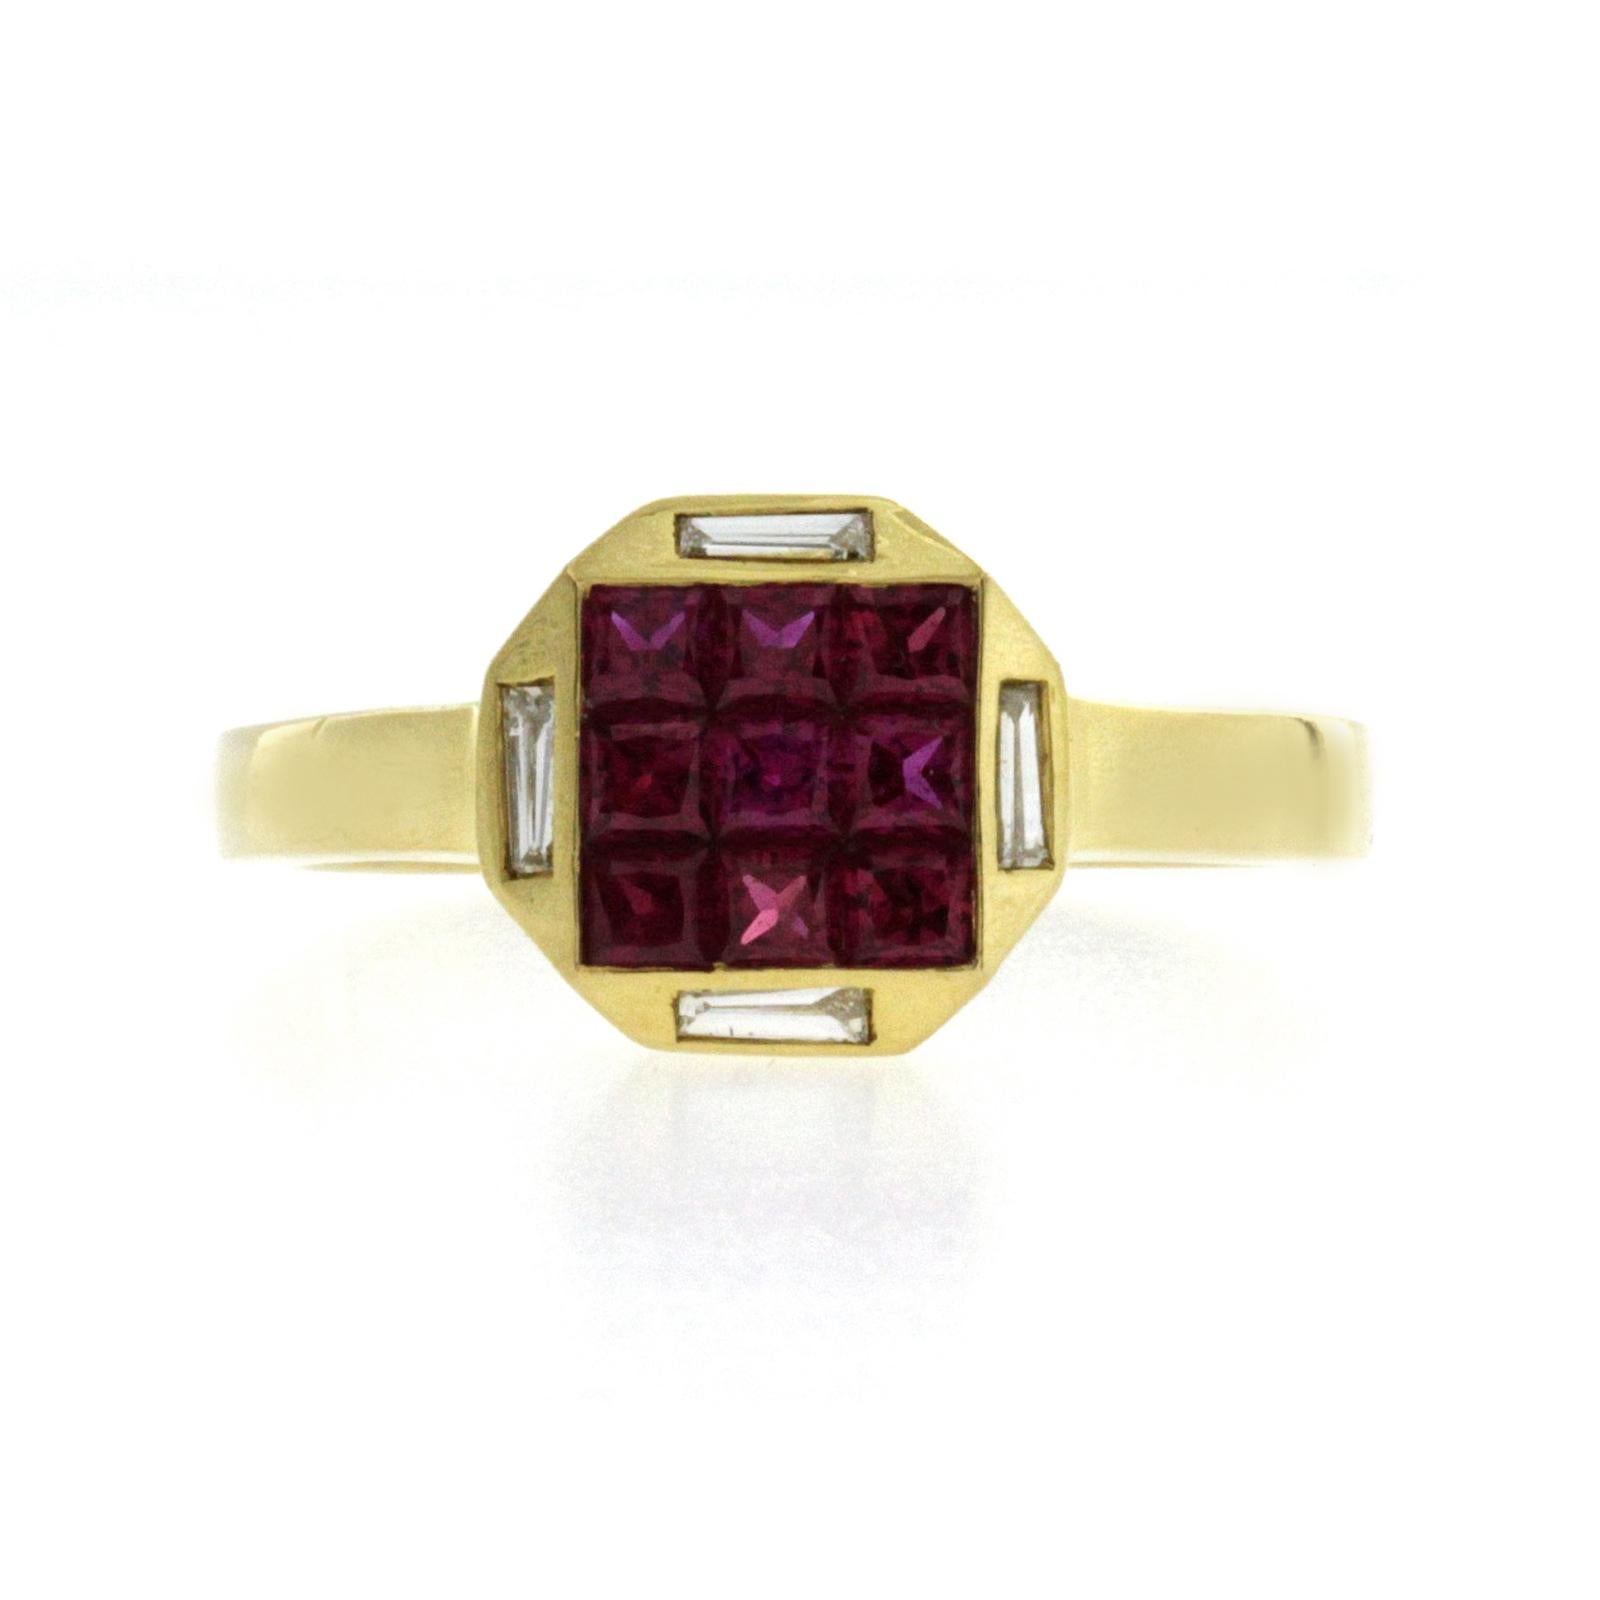 100% Authentic, 100% Customer Satisfaction

Top: 10 mm

Band Width: 2.3 mm

Metal: 18K Yellow Gold 

Size: 6-8 ( Please message Us for your Size )

Hallmarks: 750

Total Weight: 4.3 Grams

Stone Type: 1.37 CT Natural Natural Ruby & 0.15 G VS1 CT